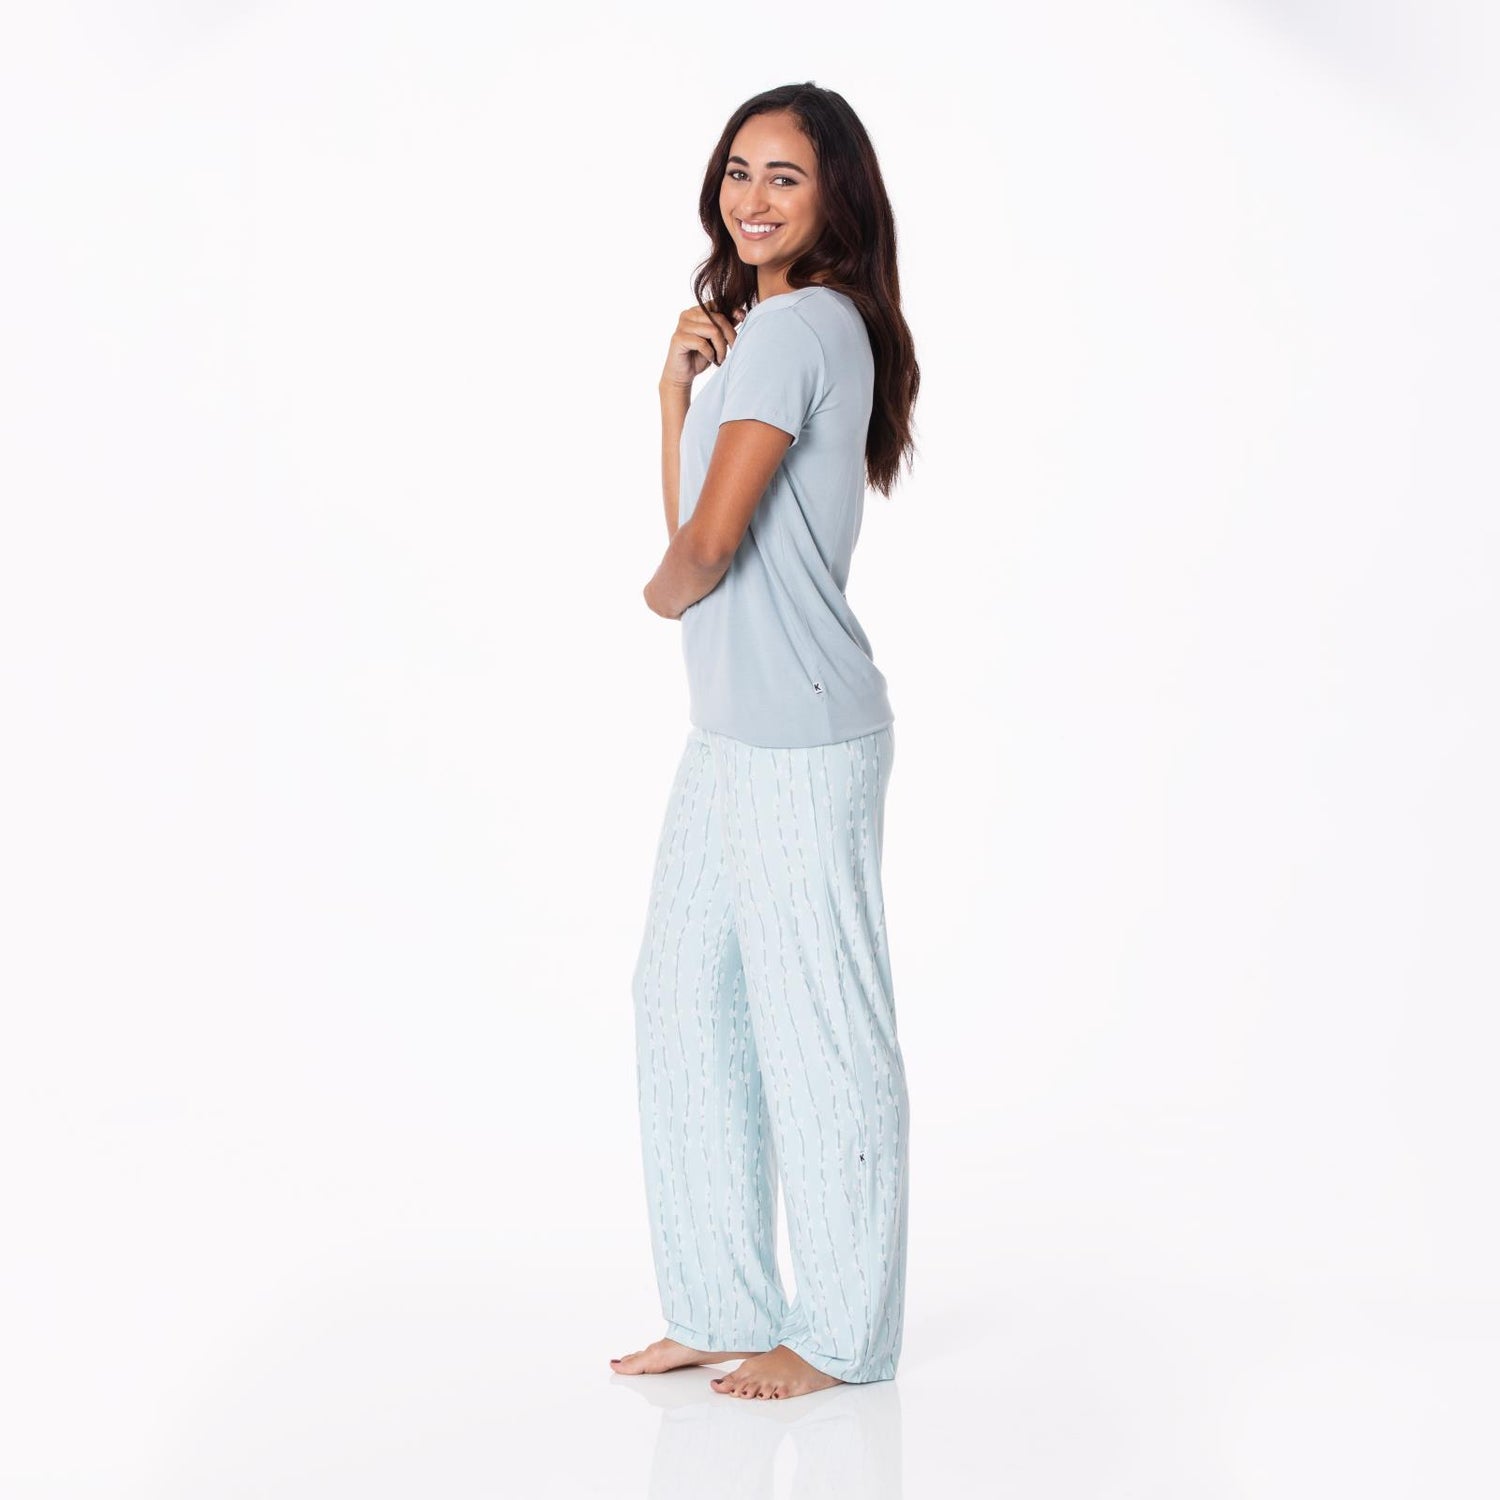 Women's Print Short Sleeve Loosey Goosey Tee & Pajama Pants Set in Spring Sky Pussy Willows